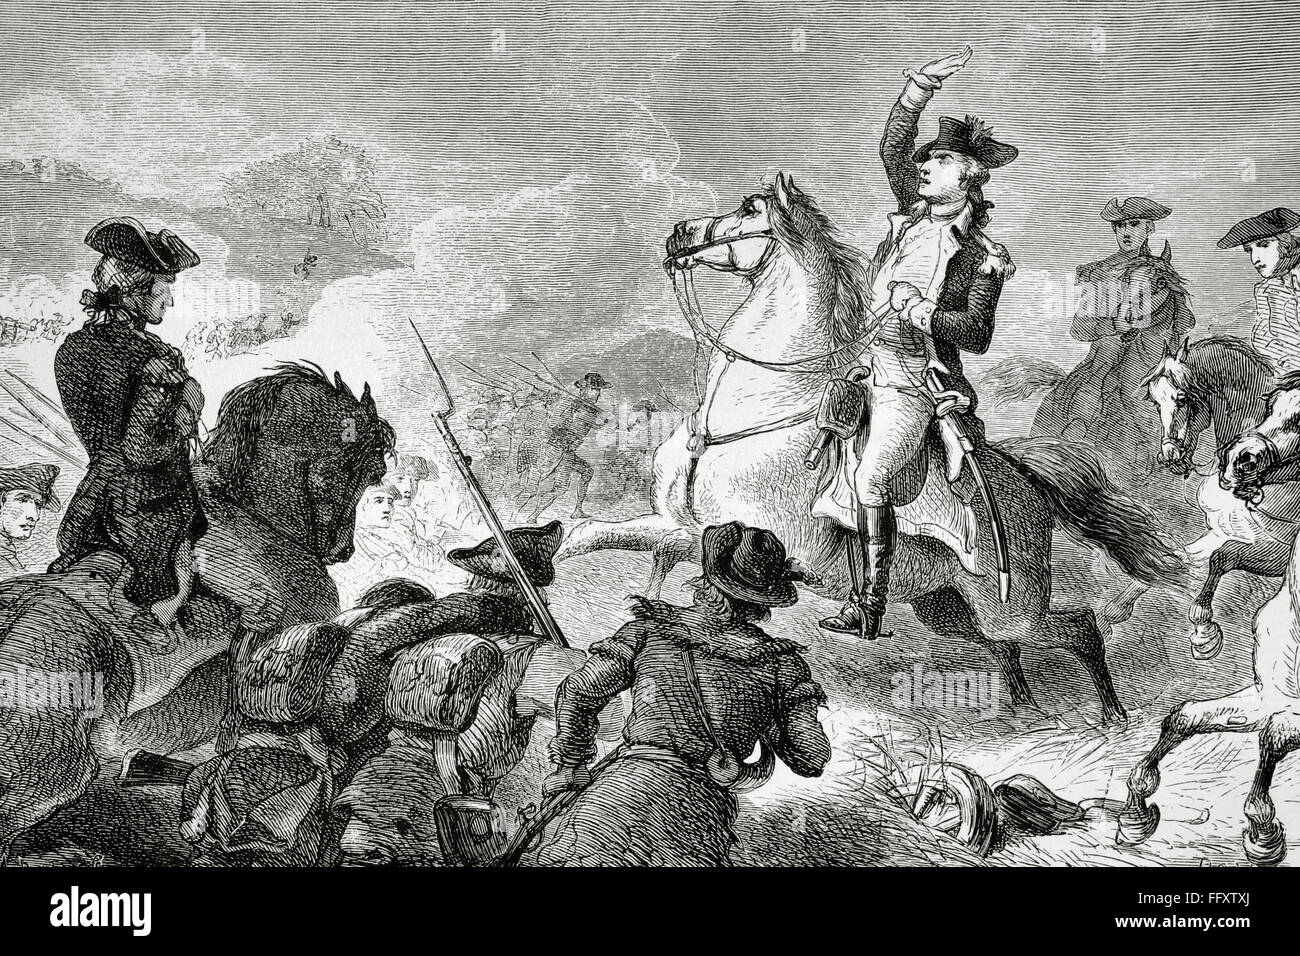 American Revolutionary War (1775-1783). George Washington (1732-1799), commander-in-Chief of the Continental Army, commanding the troop in the Battle of Monmouth (1778). Engraving. 19th century. Stock Photo